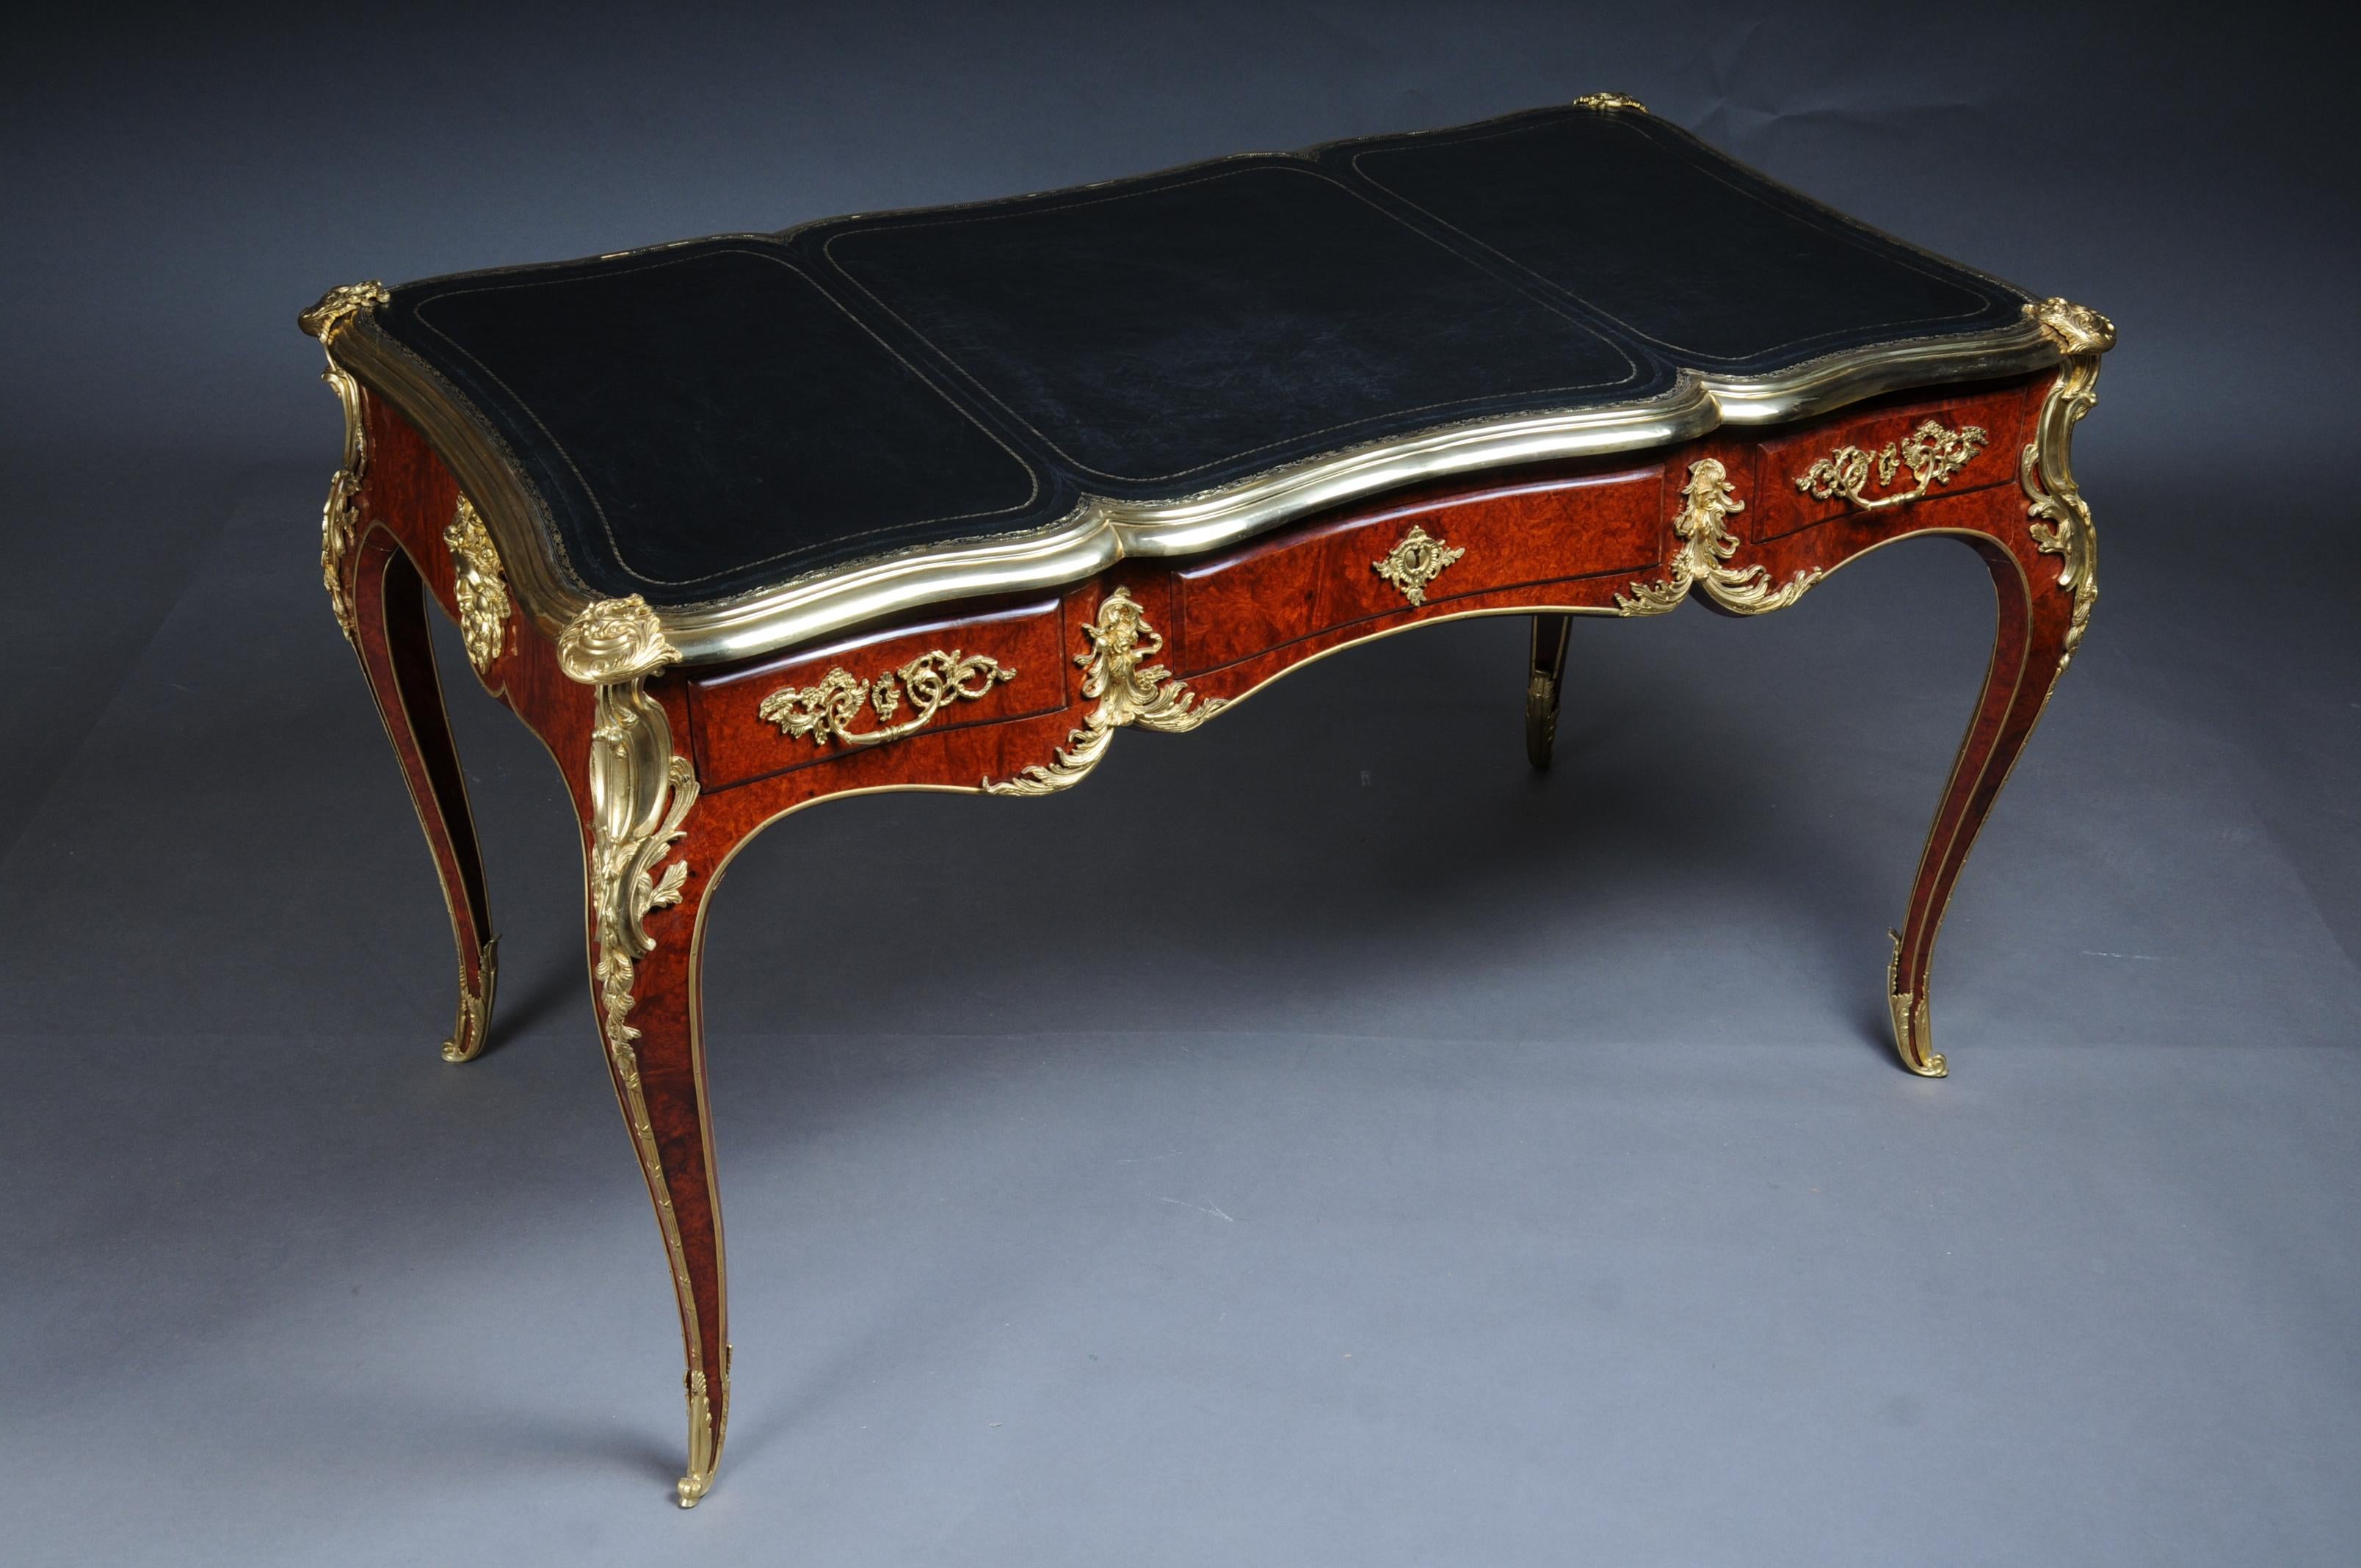 Royal desk / bureau plat in Louis XV style

flamed birch veneer on solid beech wood with rocaille applications. extremely fine, floral, gilded bronze fittings in the form of chutes. Heavily cambered, four-sided curved, three-drawer frame base with a